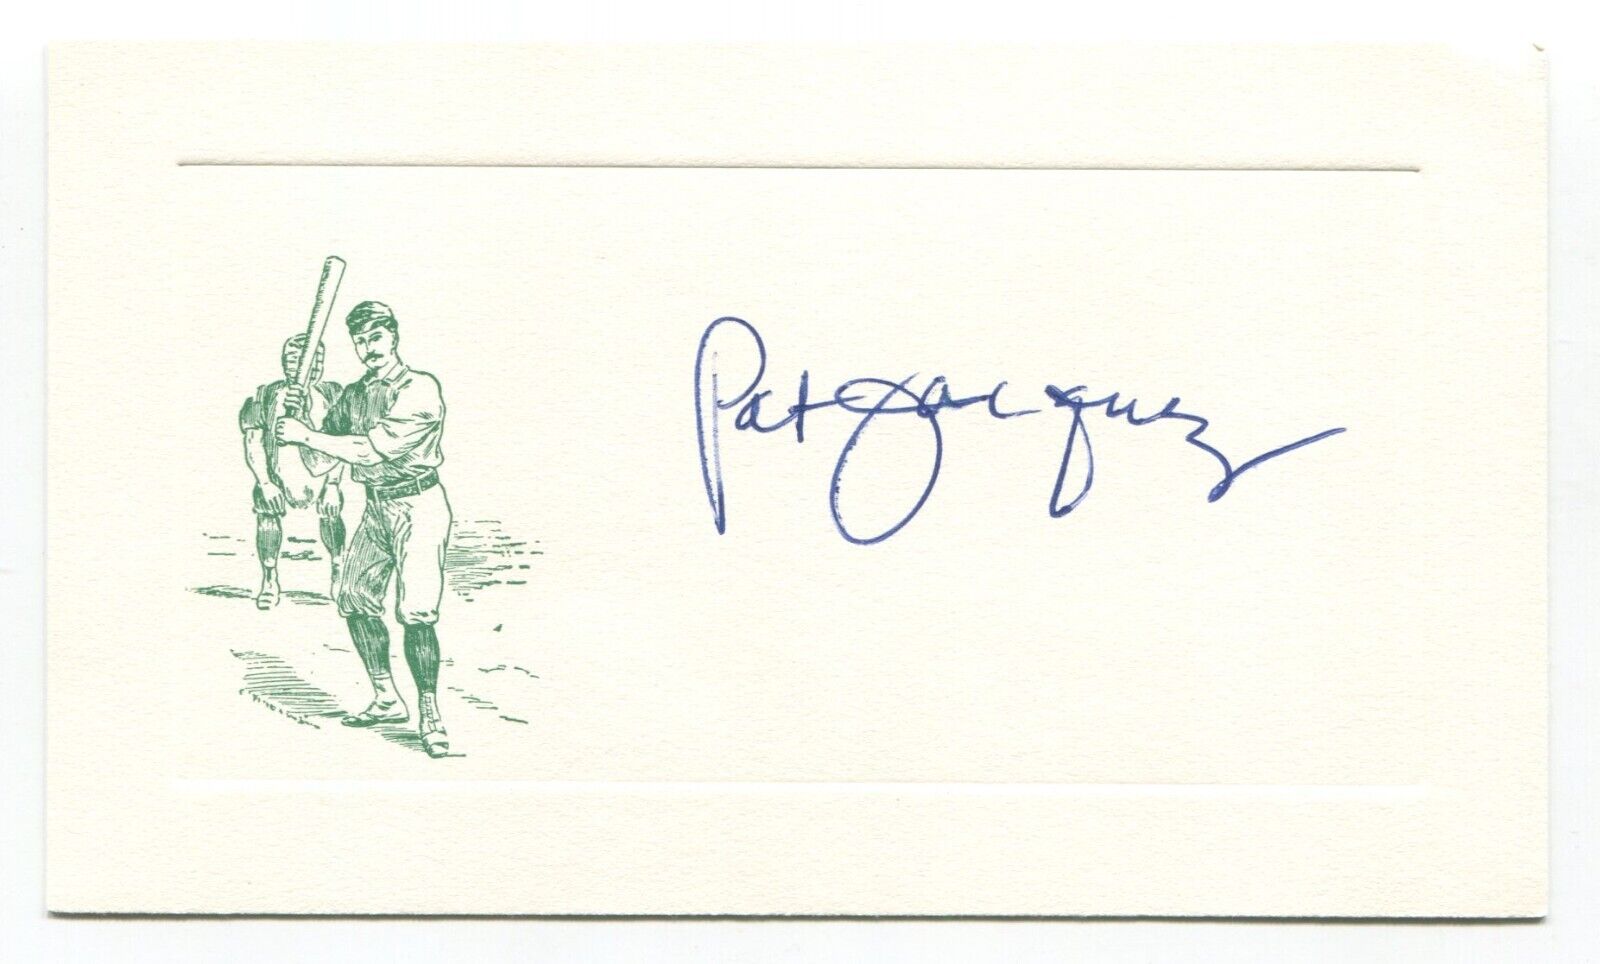 Pat Jacquez Signed Card Autograph Baseball MLB Roger Harris Collection